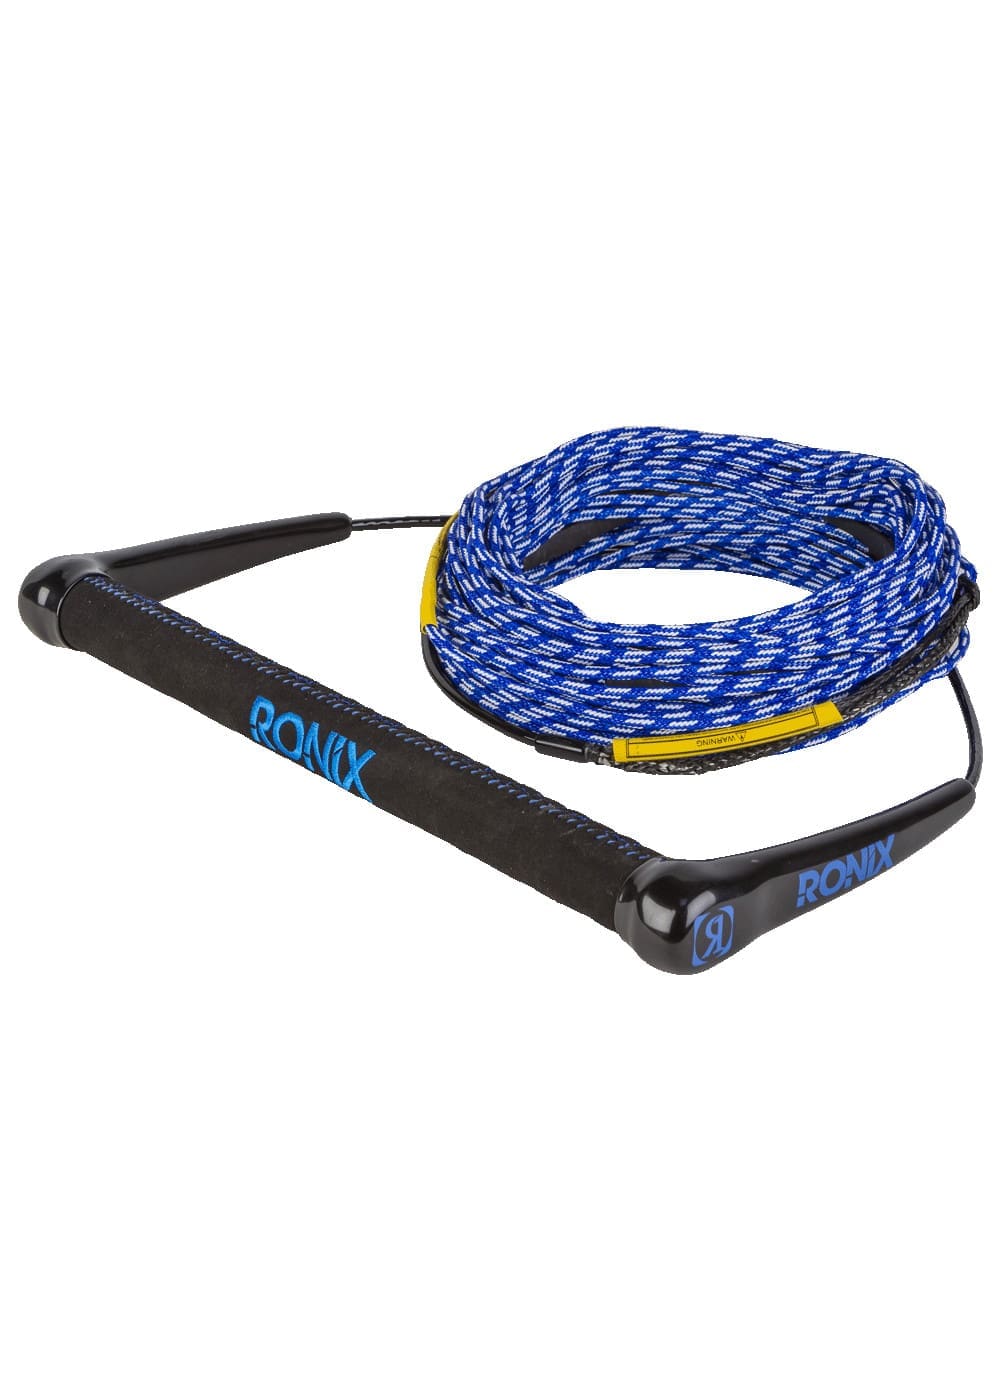 Ronix Combo 3.0 w/75ft. Solin Hybrid Rope Package - 1.15